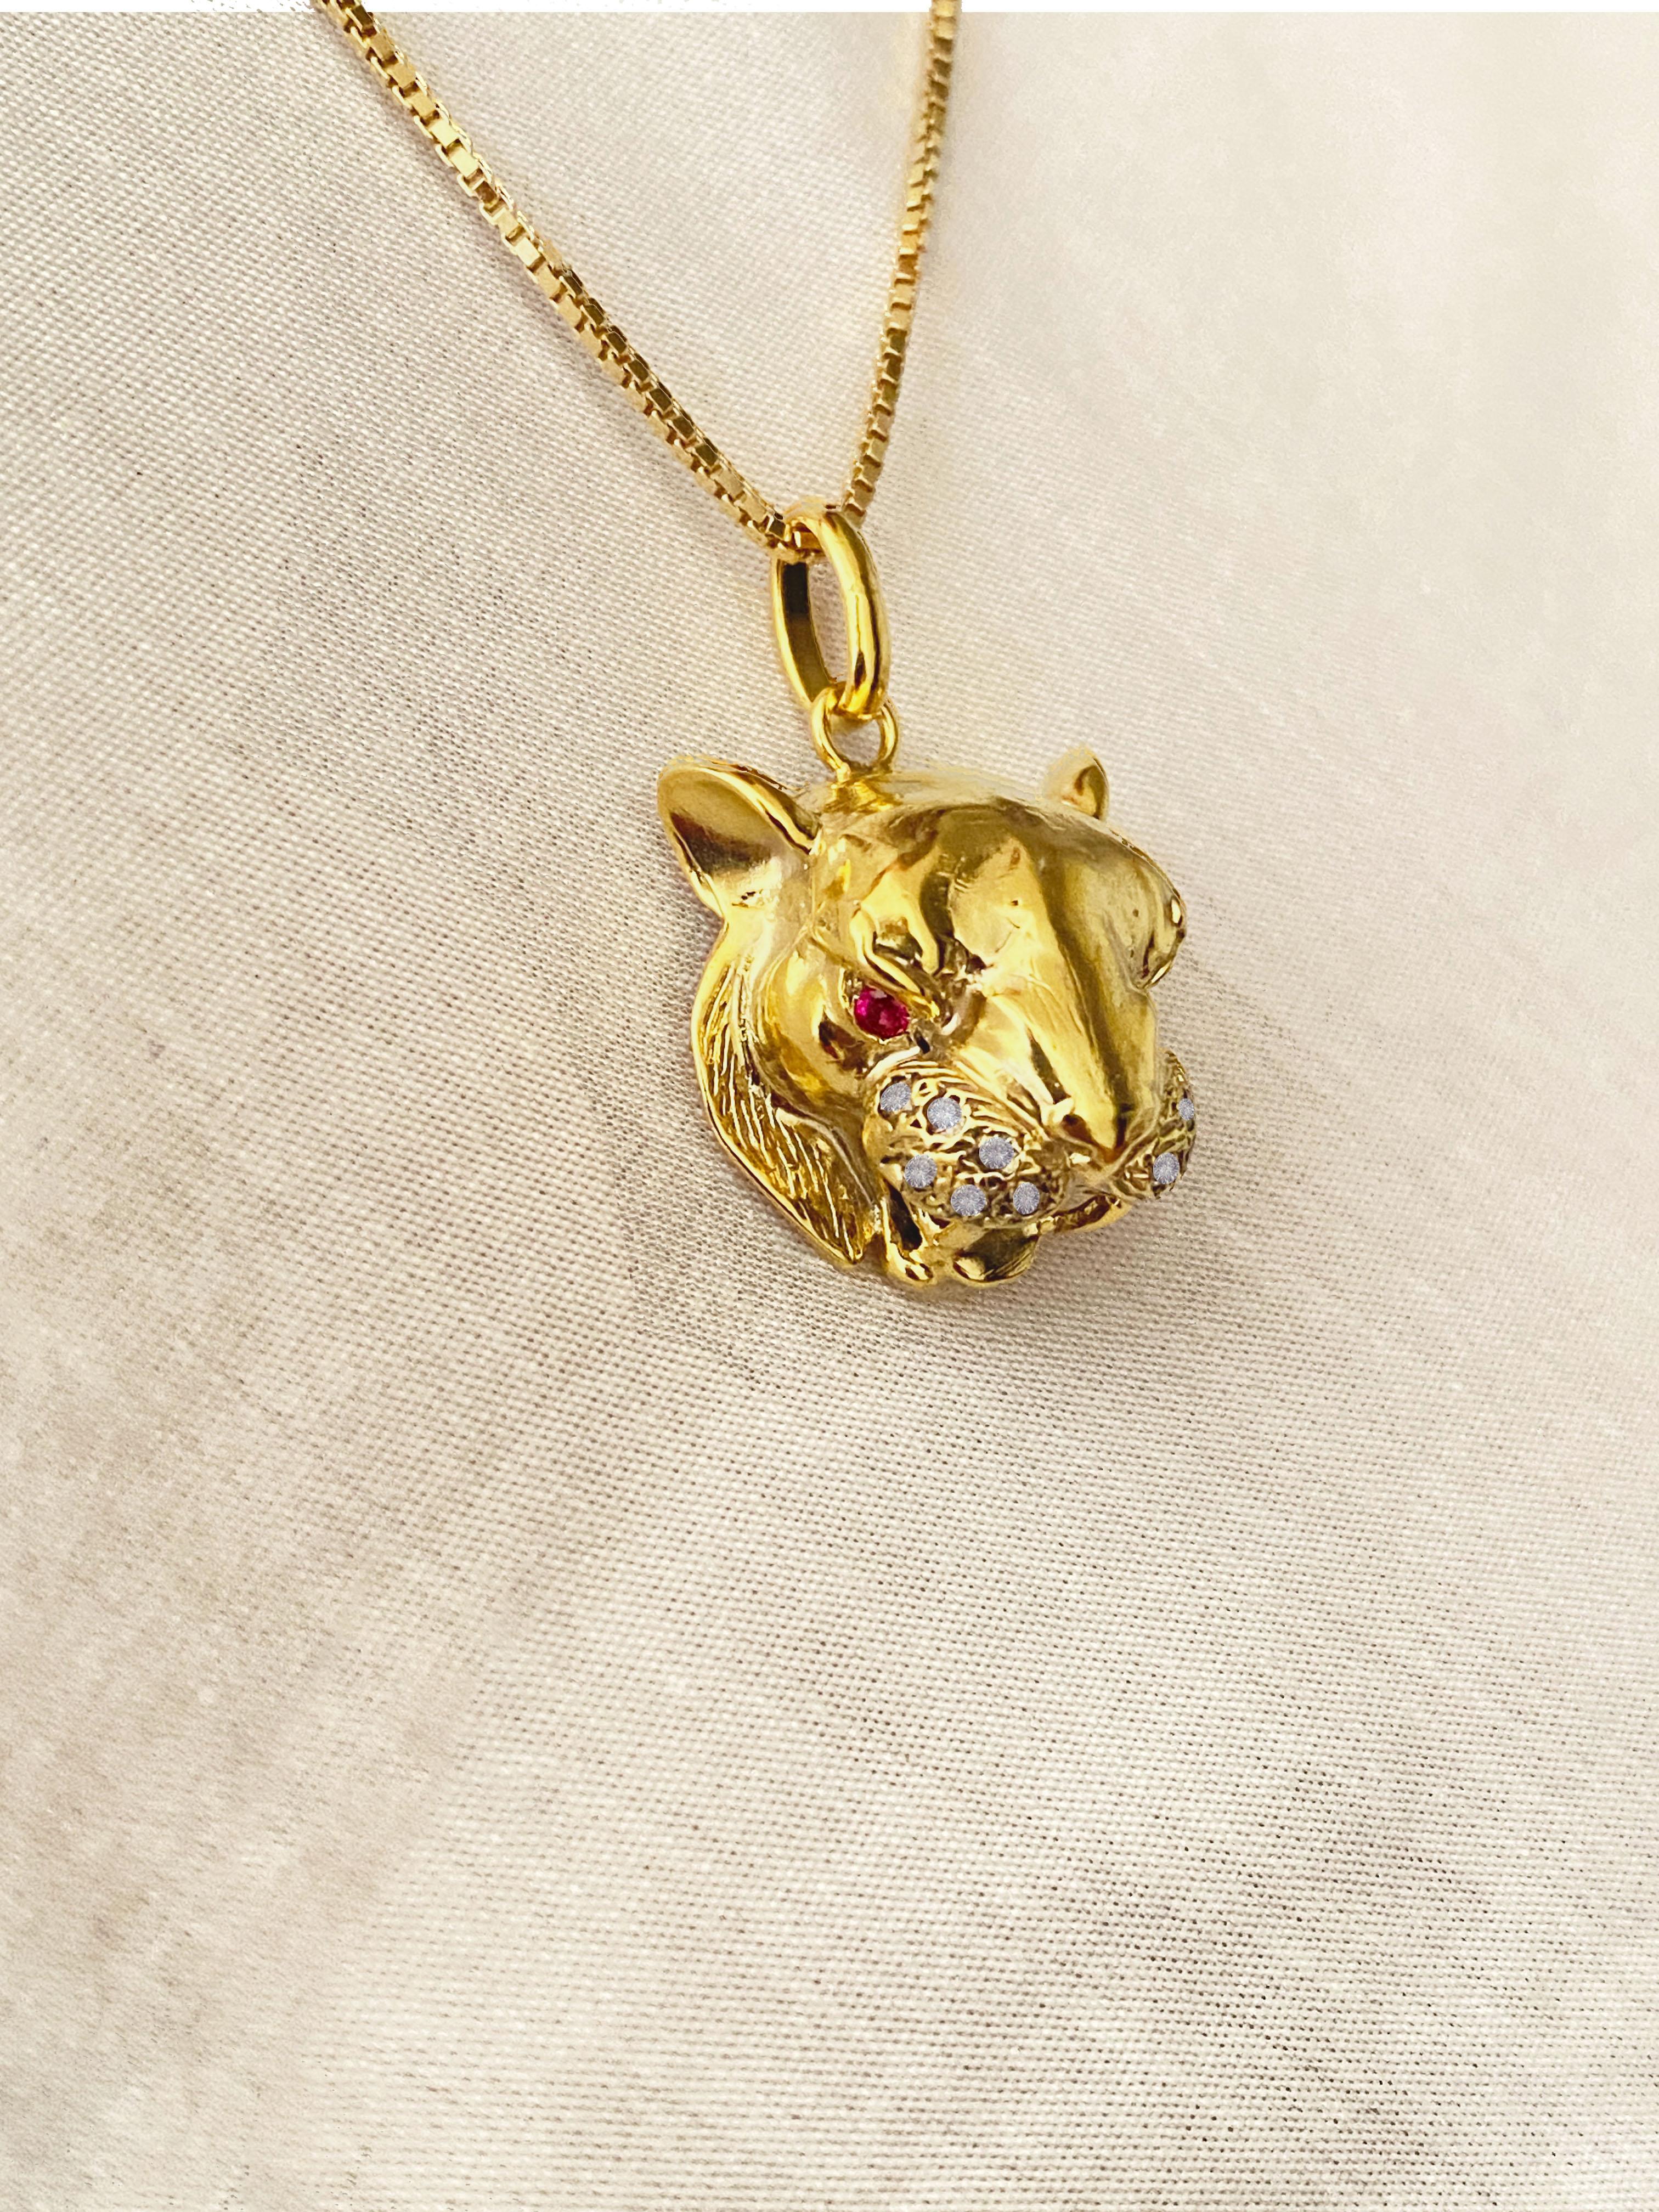 18K Gold Power Tiger Pendant Cube Chain Rubies Diamonds Handcrafted in Italy  For Sale 2